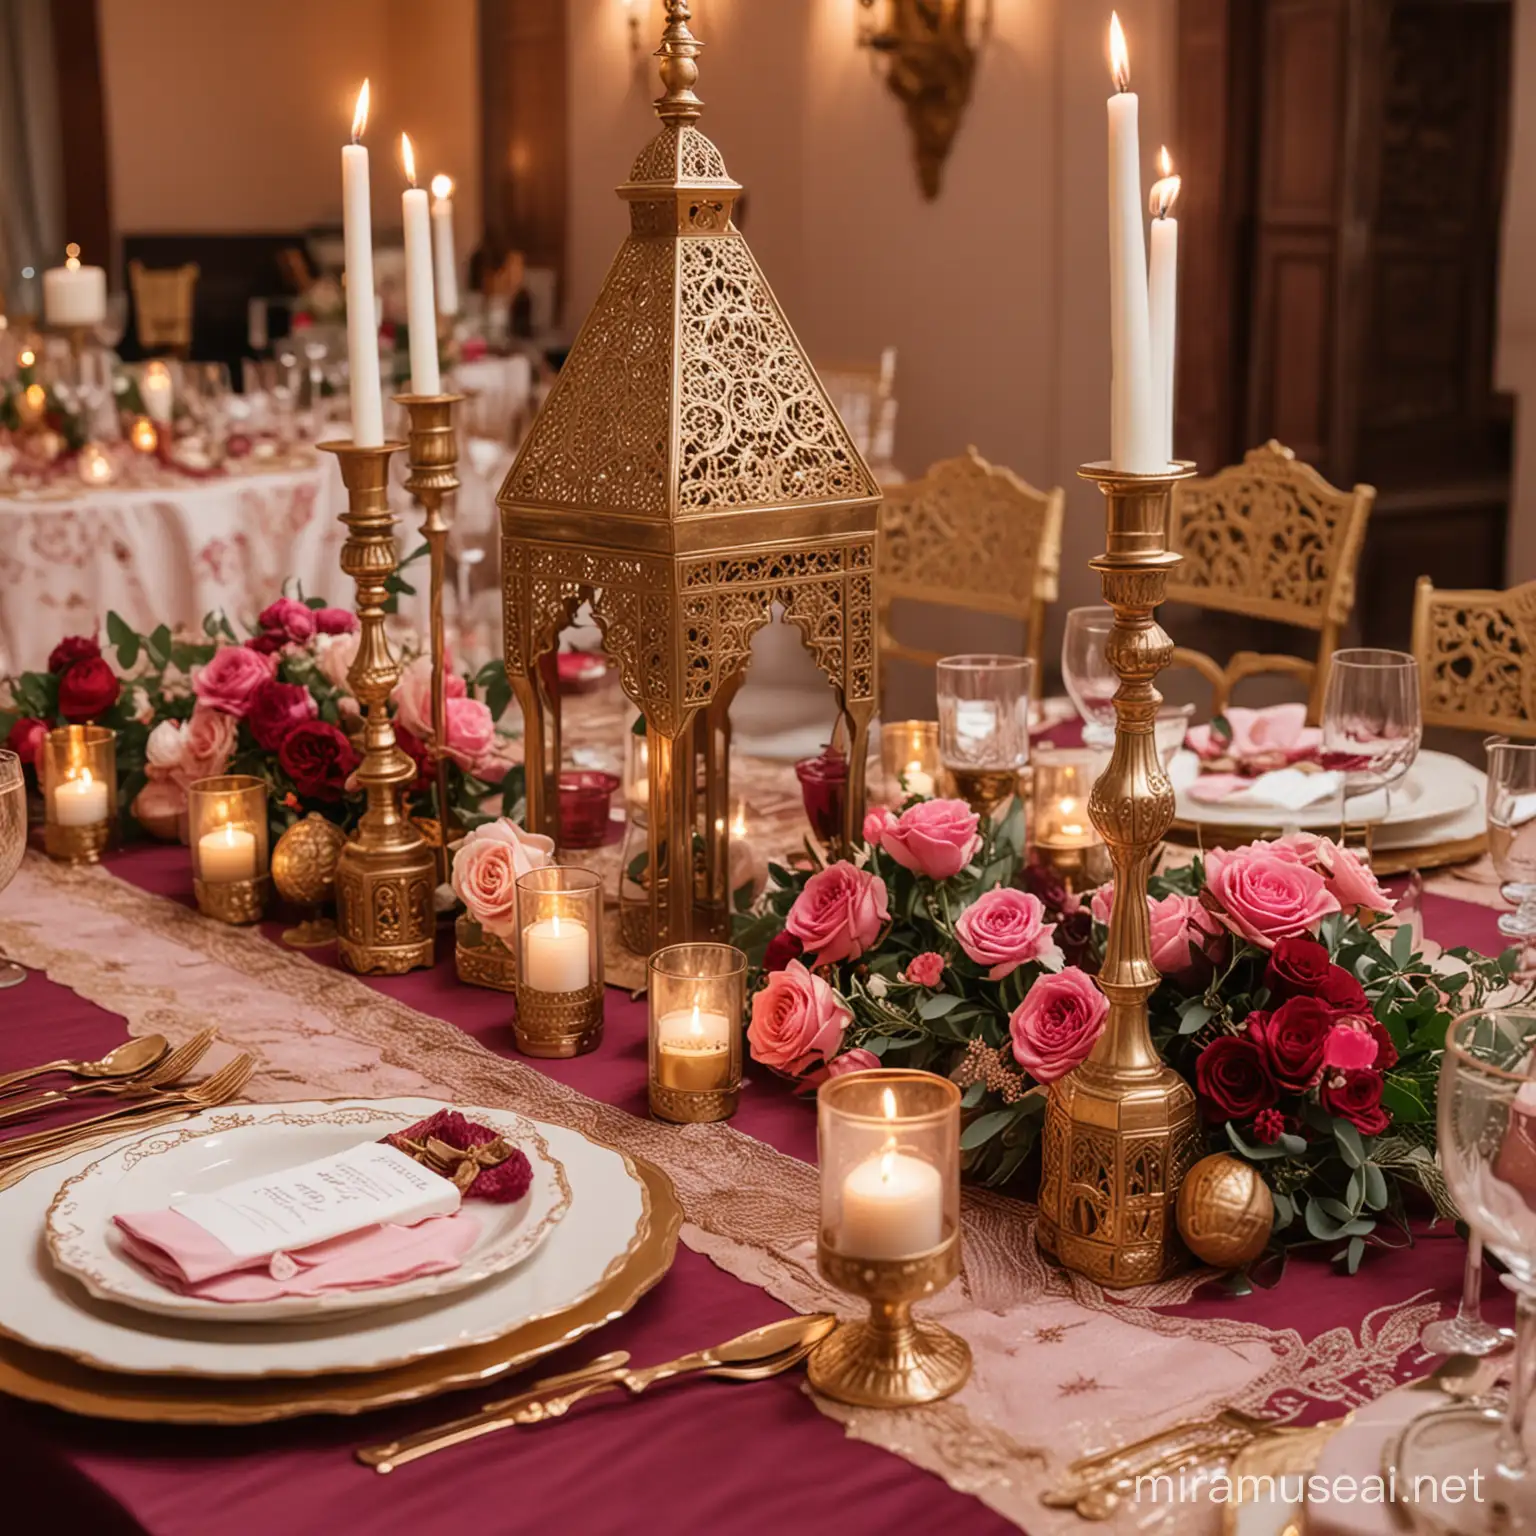 design a wedding reception  inspired by oriental design of marrakech morocco in muted shades of pink, deep burgundy with gold accents including candelabras, small moroccan lanterns and gold camel figurines